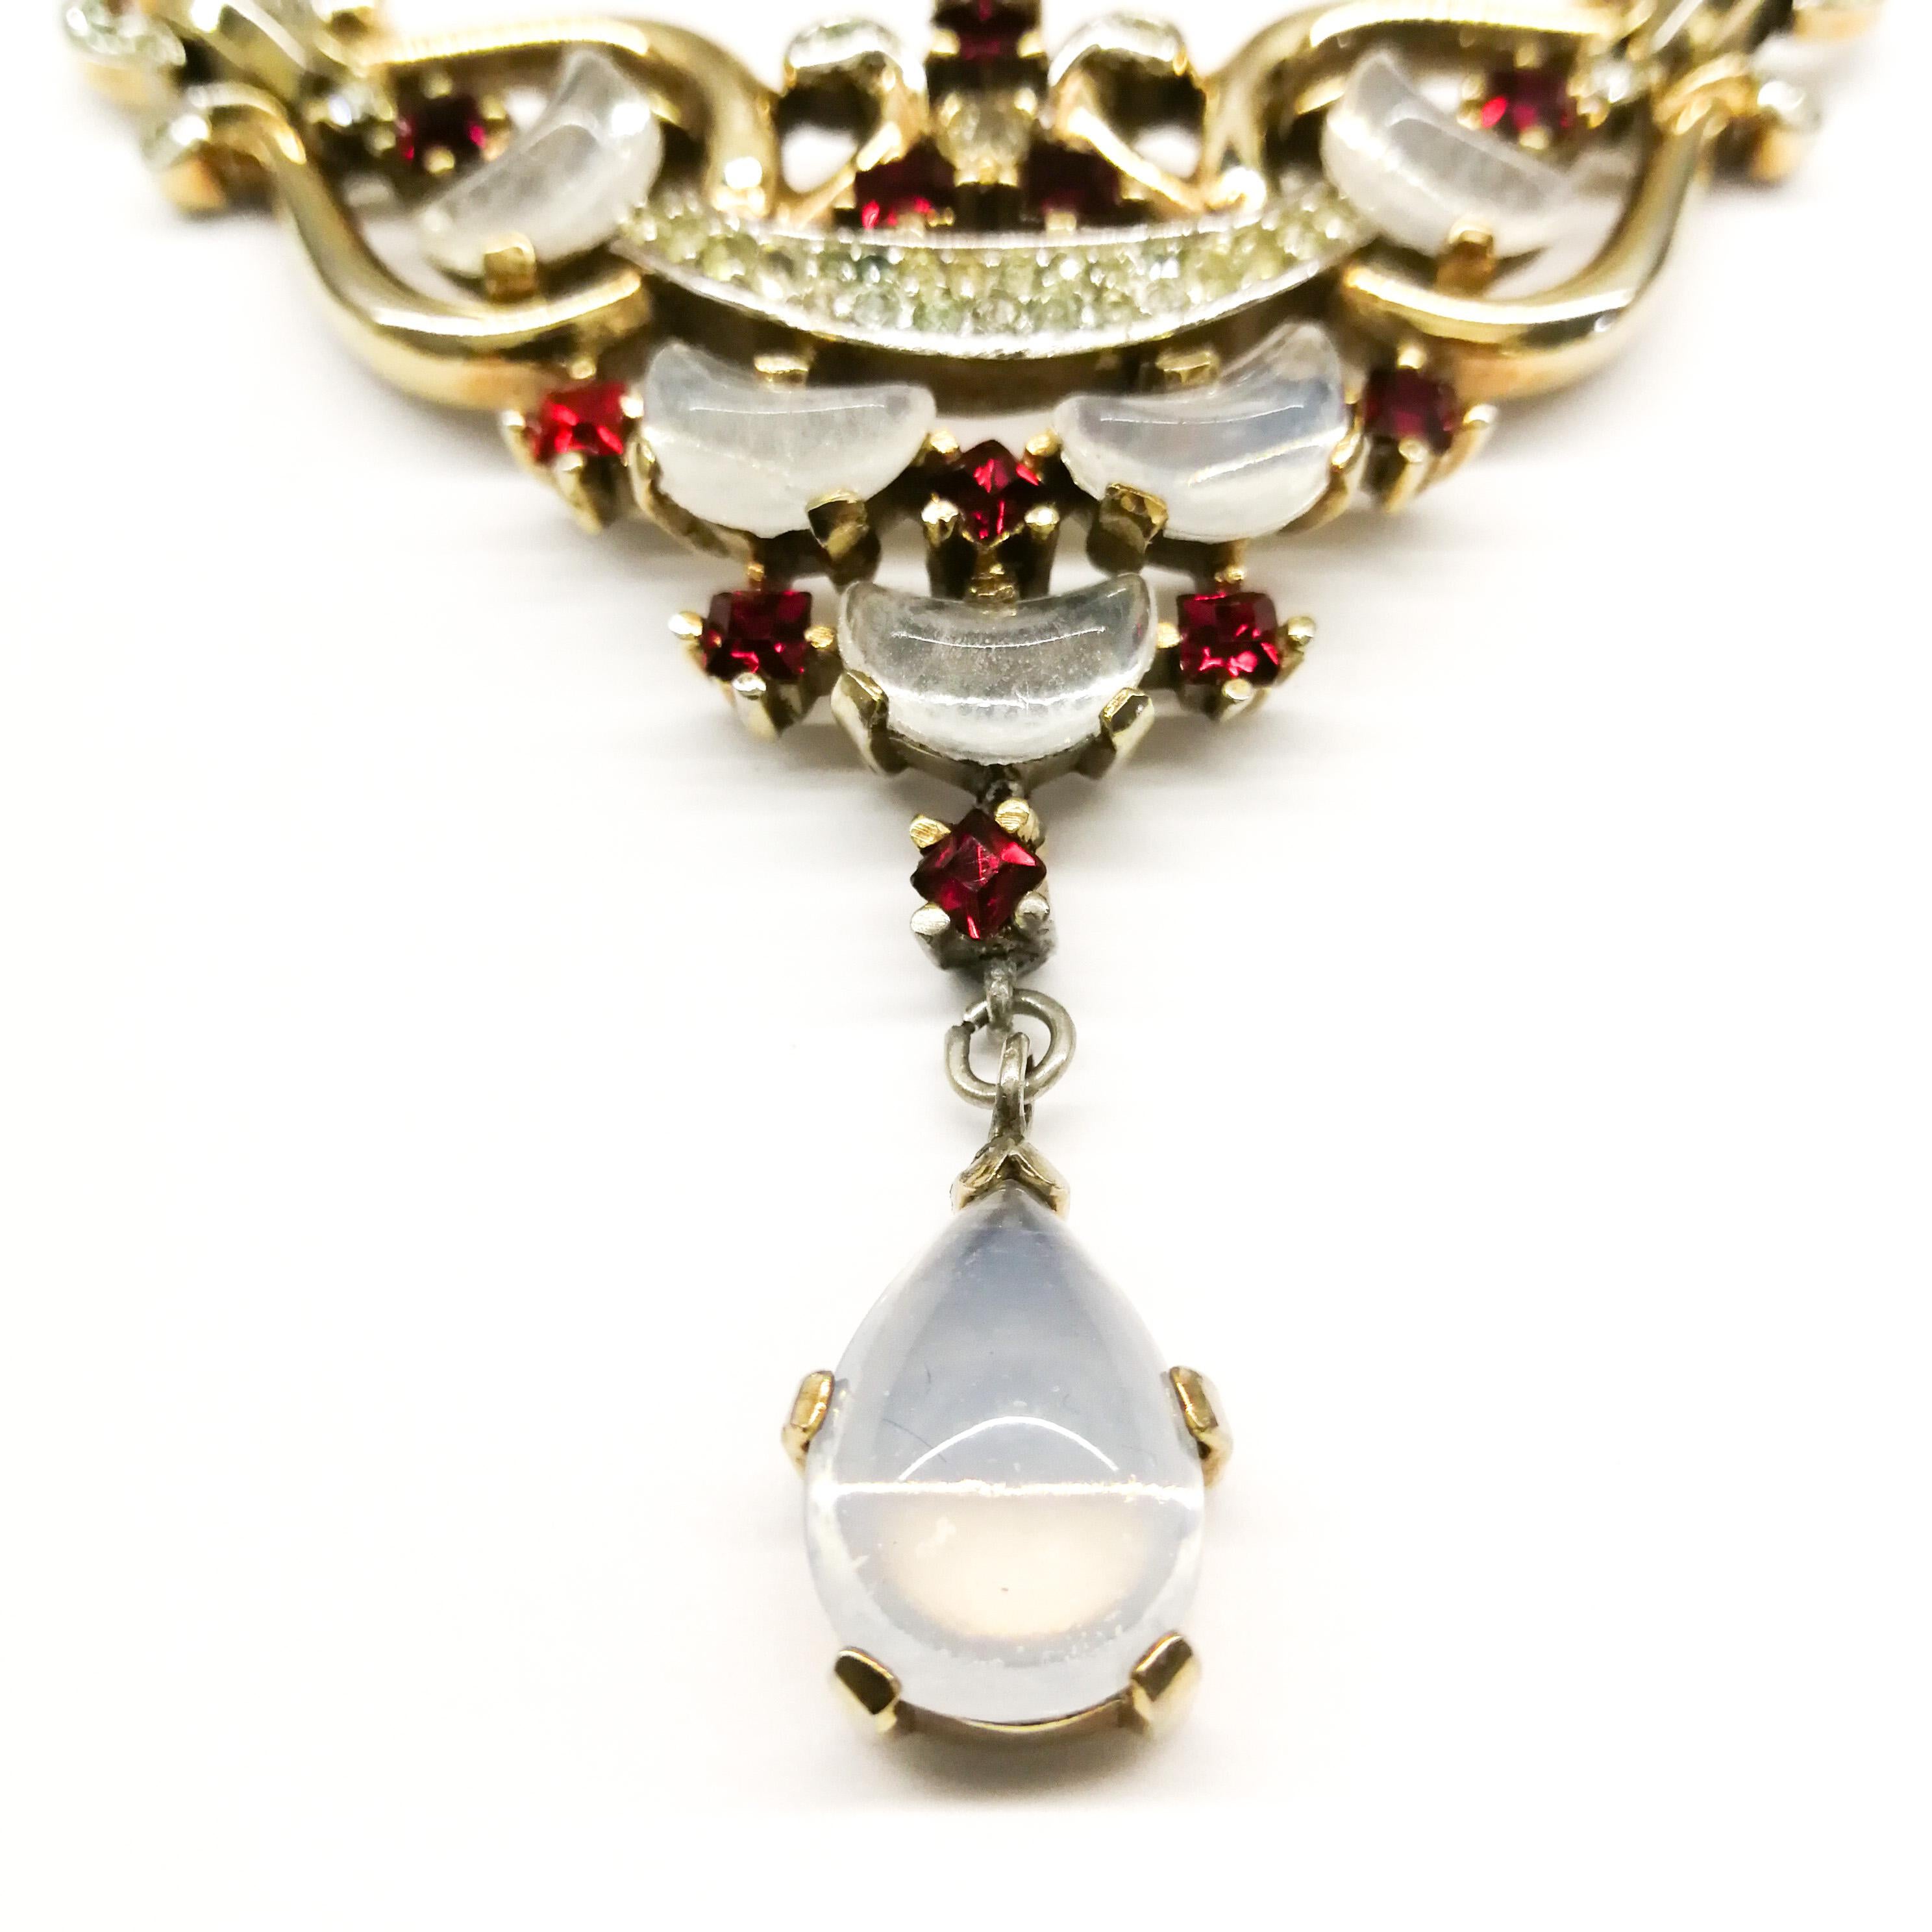 A desirable and wearable necklace, designed by Alfred Philippe for Trifari, as part of the 'Clair De Lune' collection, produced in the early 1950s. Set with 'demi-lune' moonstone glass stones, or crescents, with a drop, and ruby and clear pastes, it